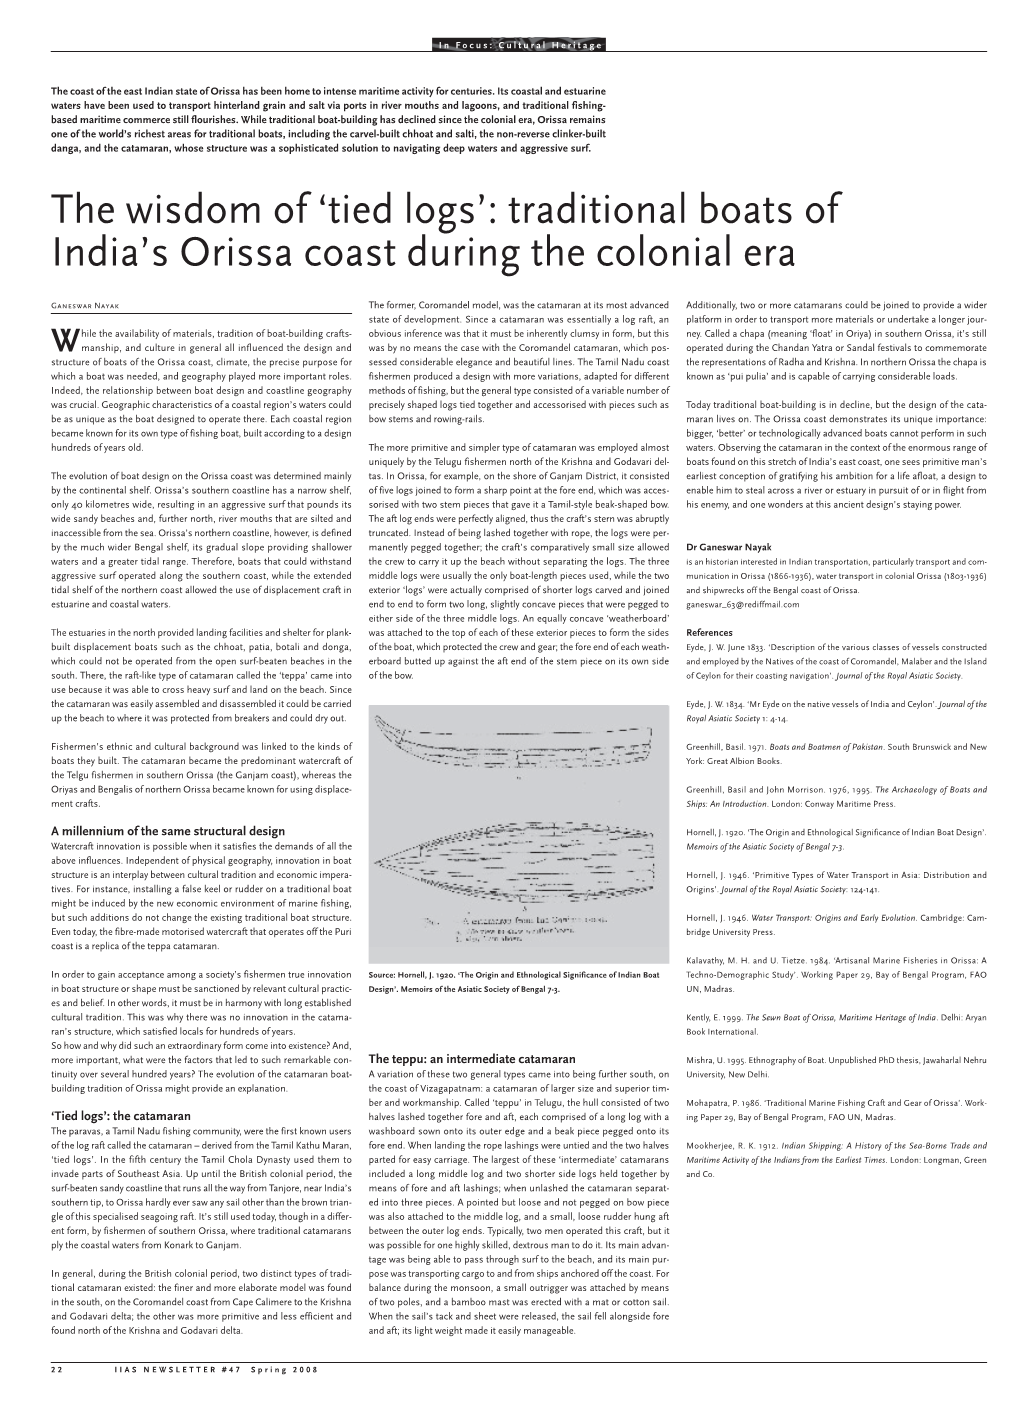 Traditional Boats of India's Orissa Coast During the Colonial